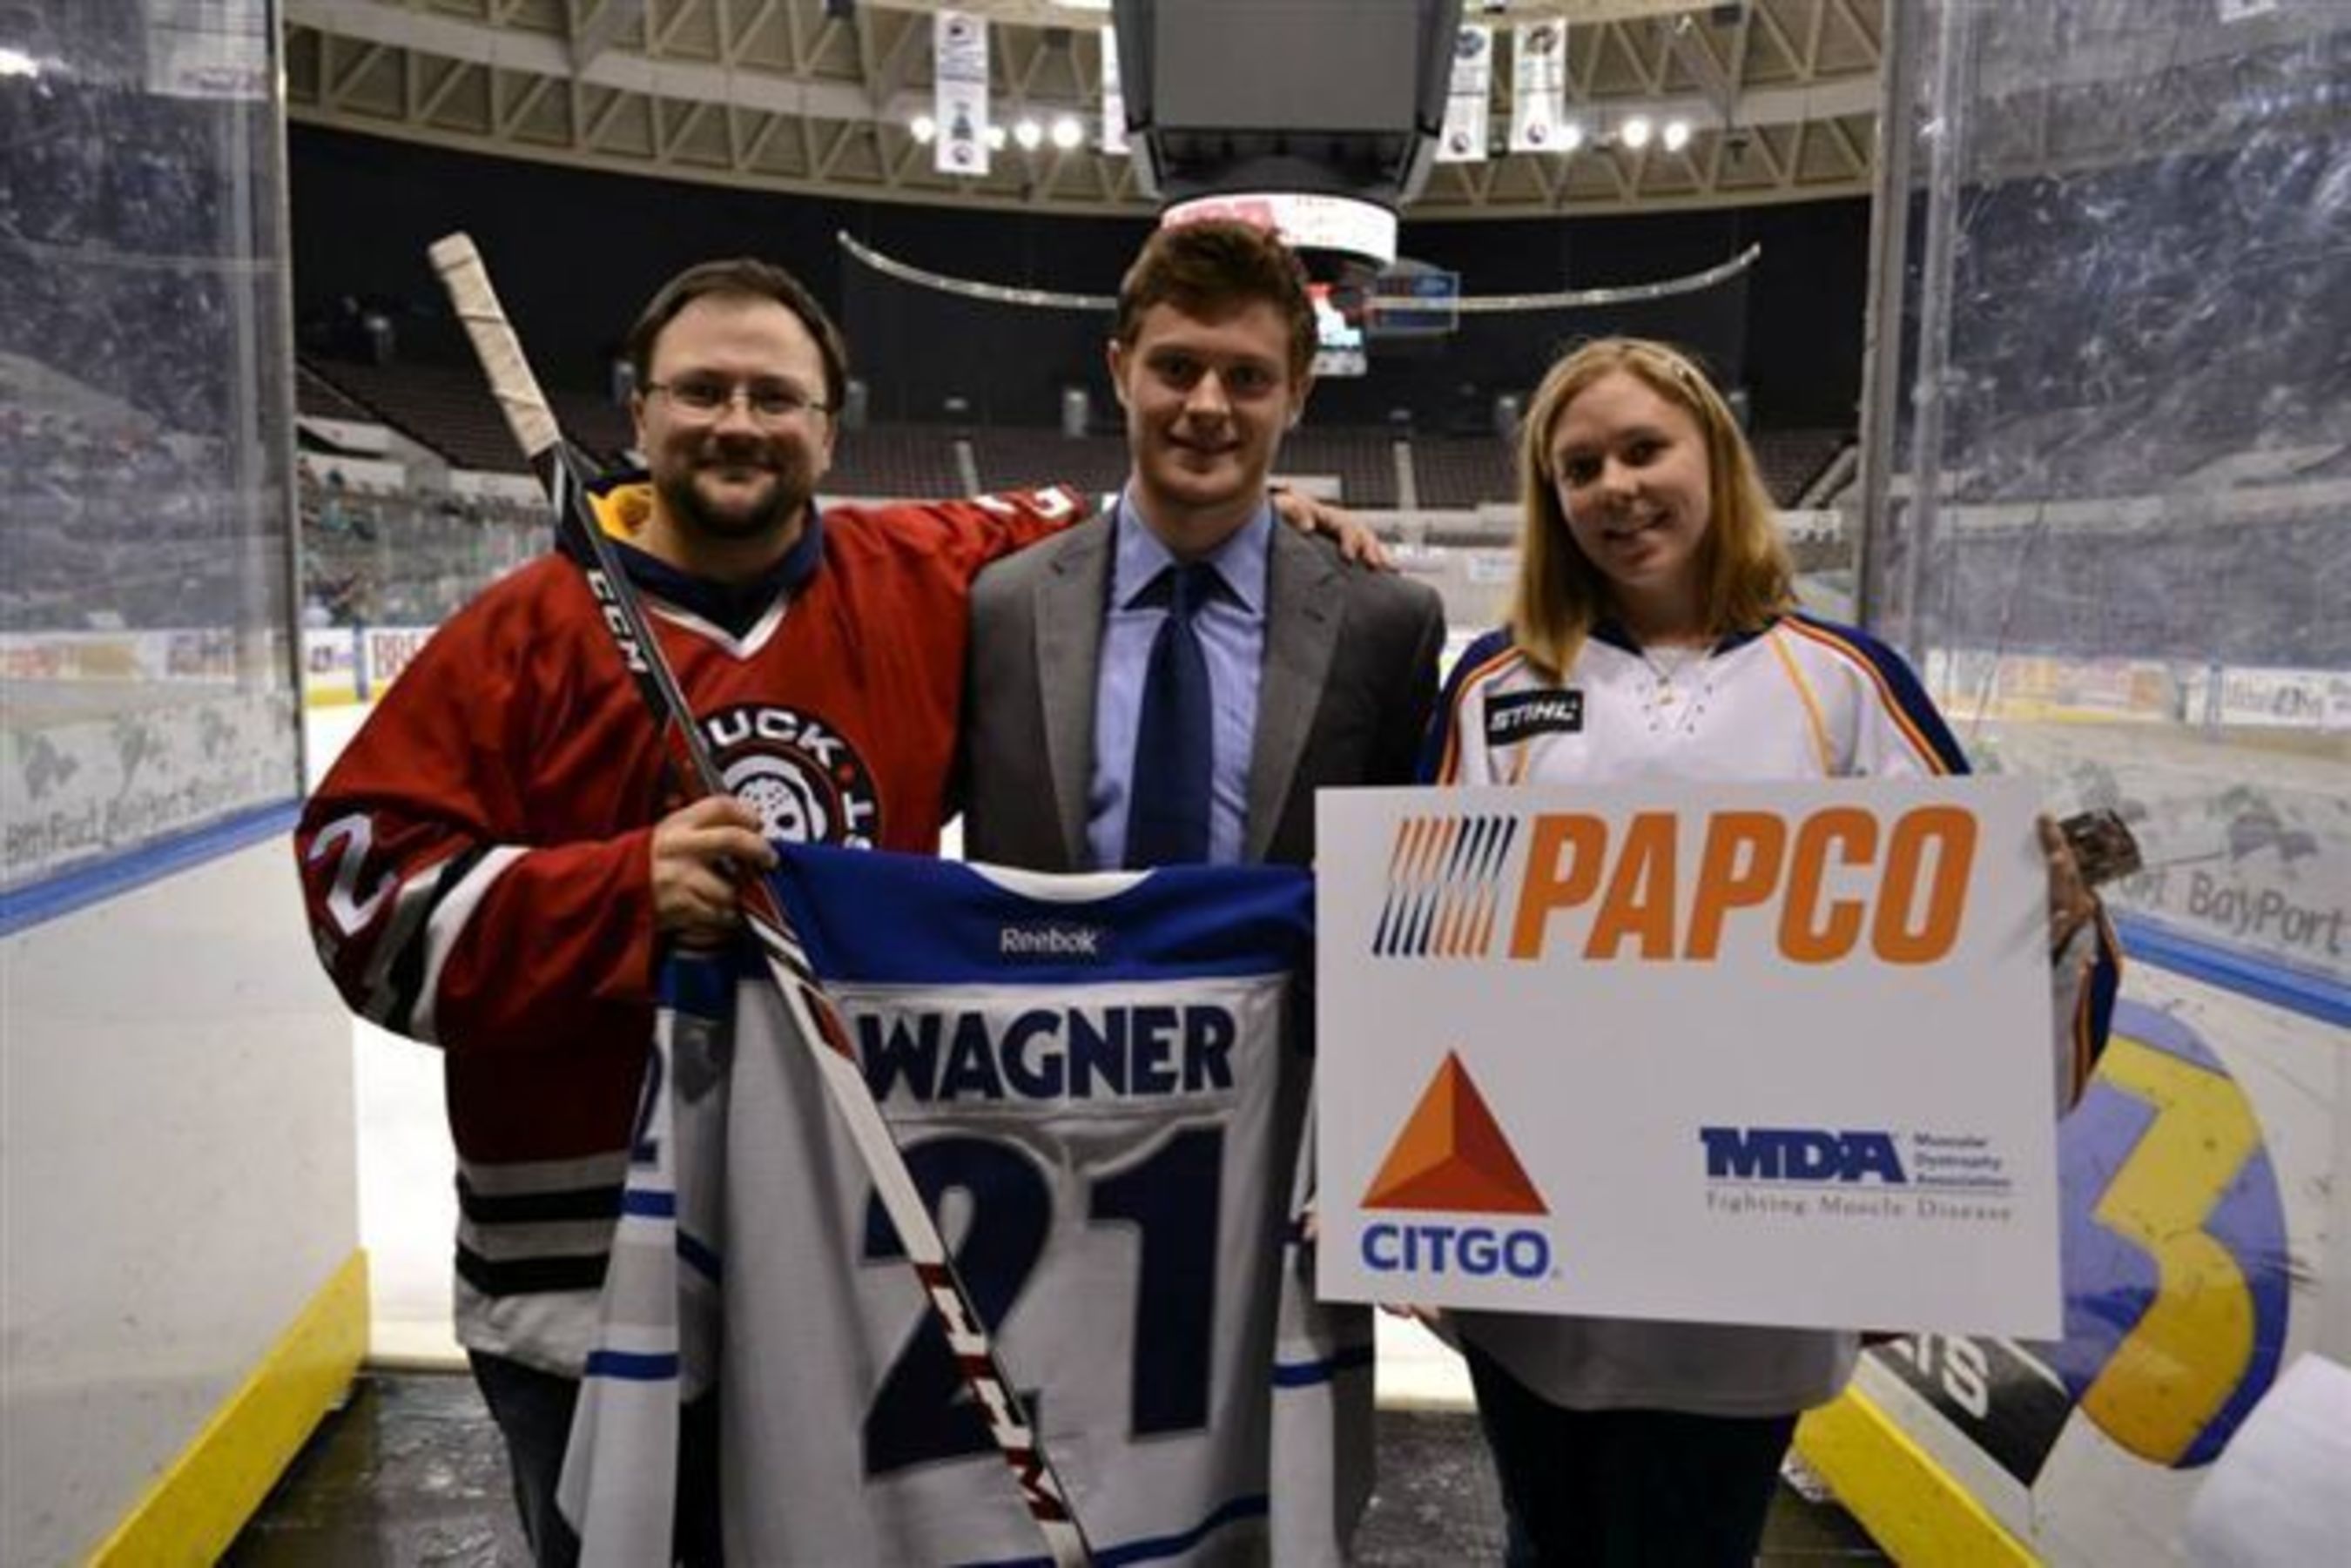 PAPCO Inc. and CITGO MDA Jersey Auction participant Jack Miceli, Norfolk Admirals hockey player Chris Wagner and Brenda Goodson at Scope Arena raising awareness for muscular dystrophy. (PRNewsFoto/CITGO)